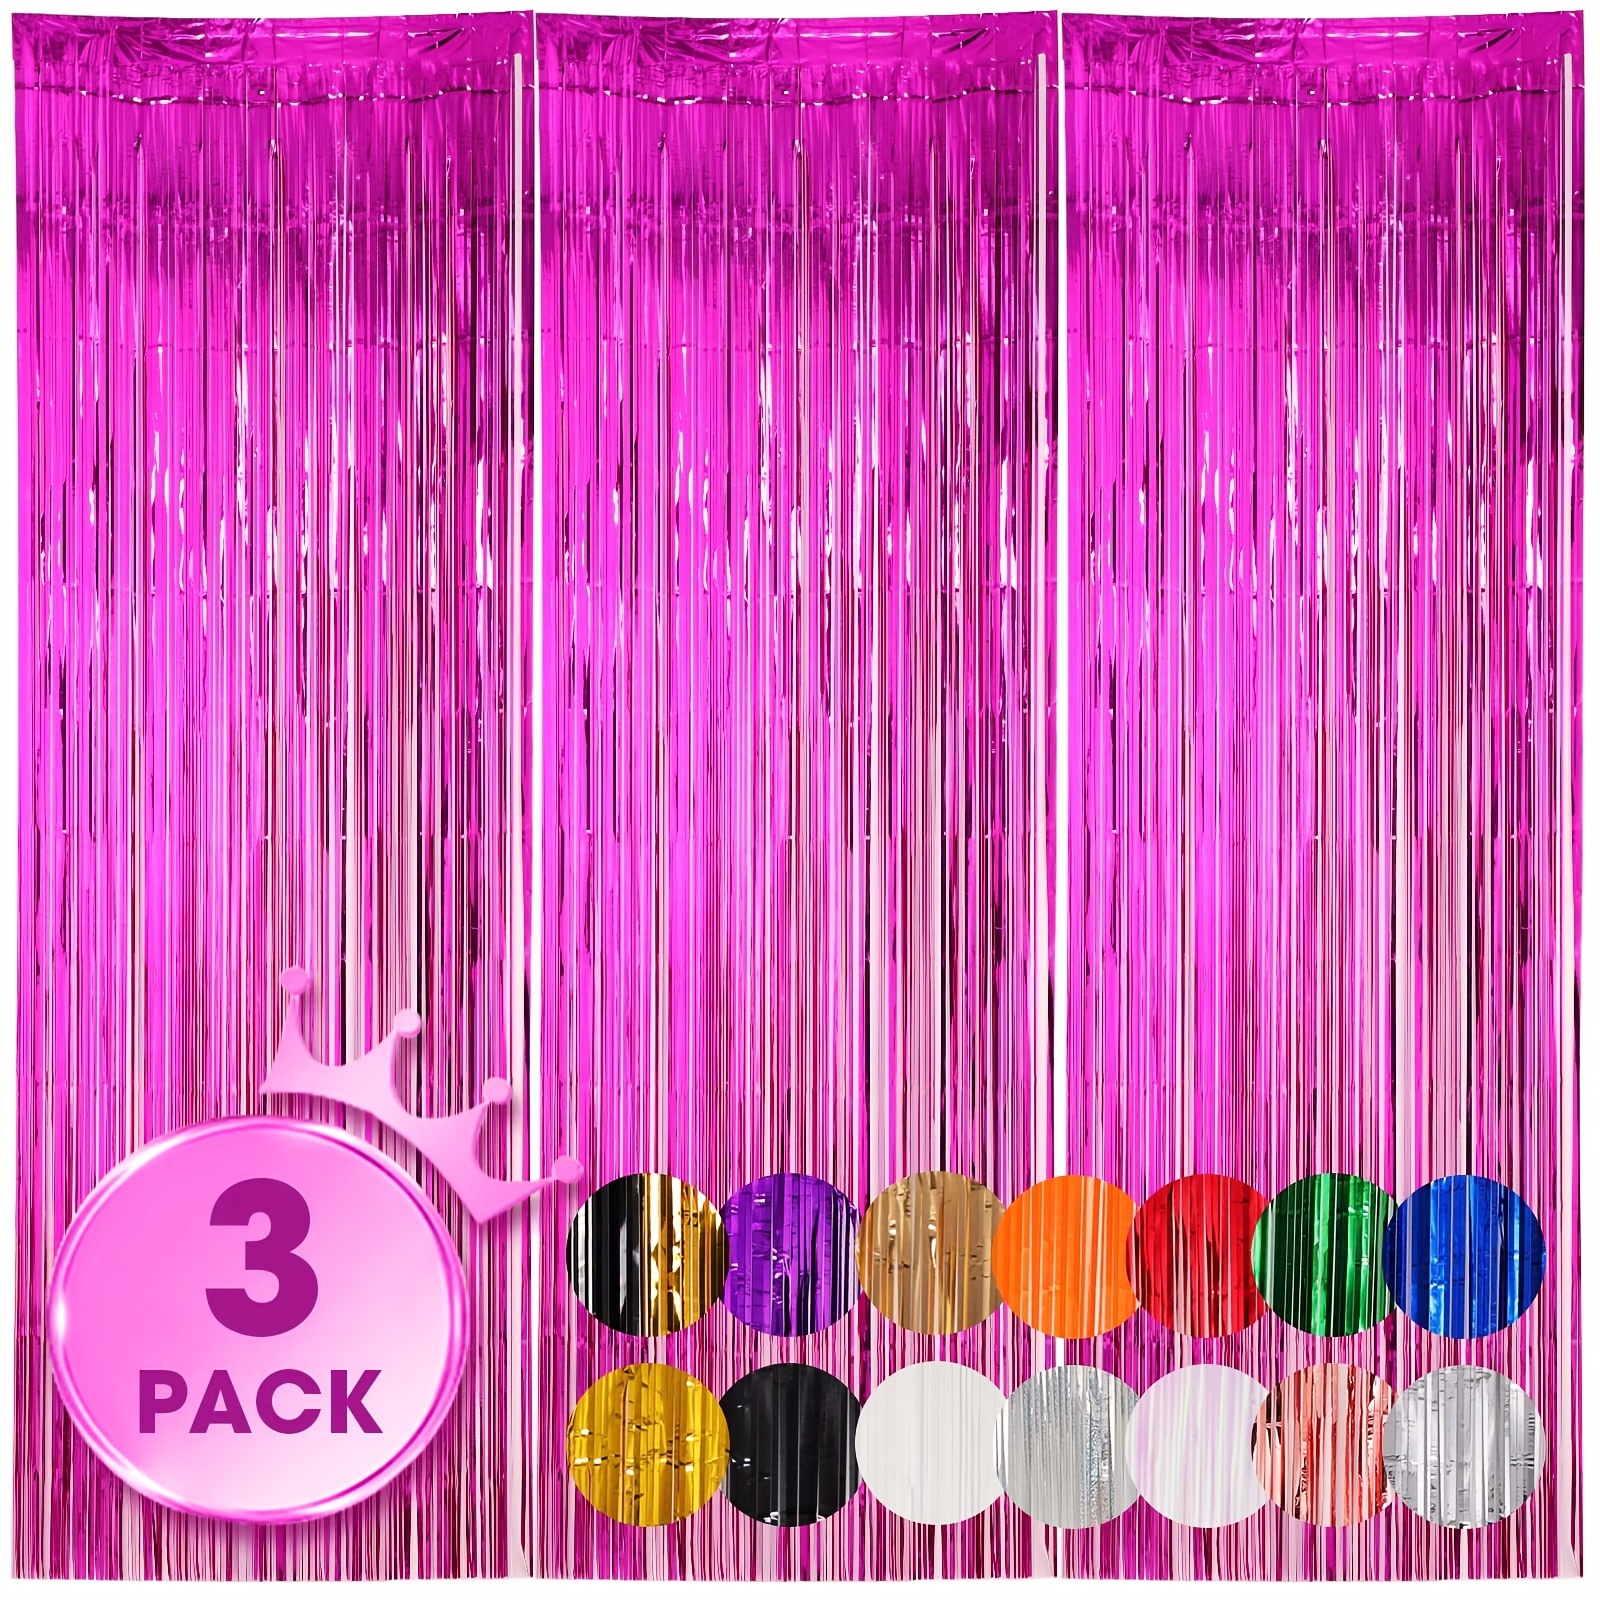  4 Pack 3.2Ft x 8.2Ft Red Fringe Curtain Backdrop, Sparkle  Metallic Tinsel Foil Fringe Streamers Background for Photo Booth Birthday  Wedding Baby Shower Halloween Christmas Party Decorations : Home & Kitchen